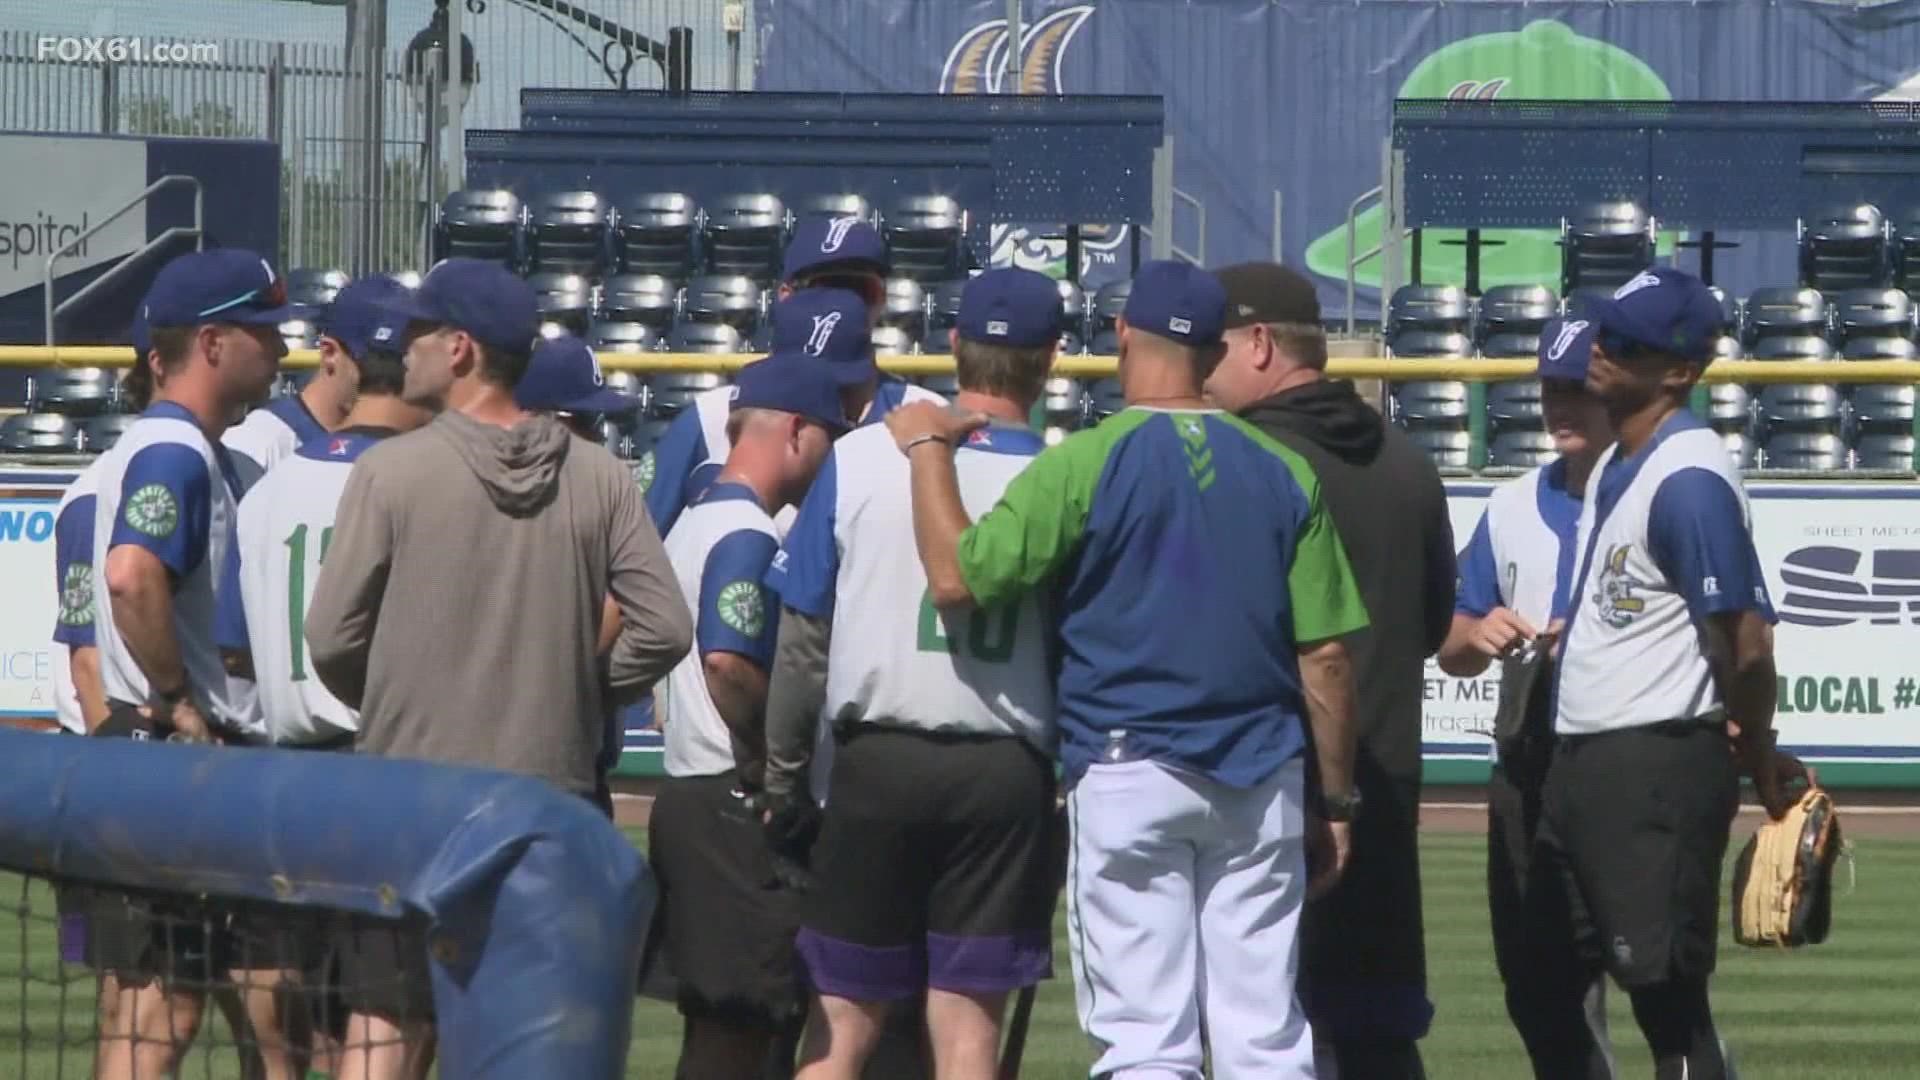 Hartford Yard Goats have first game of the season!